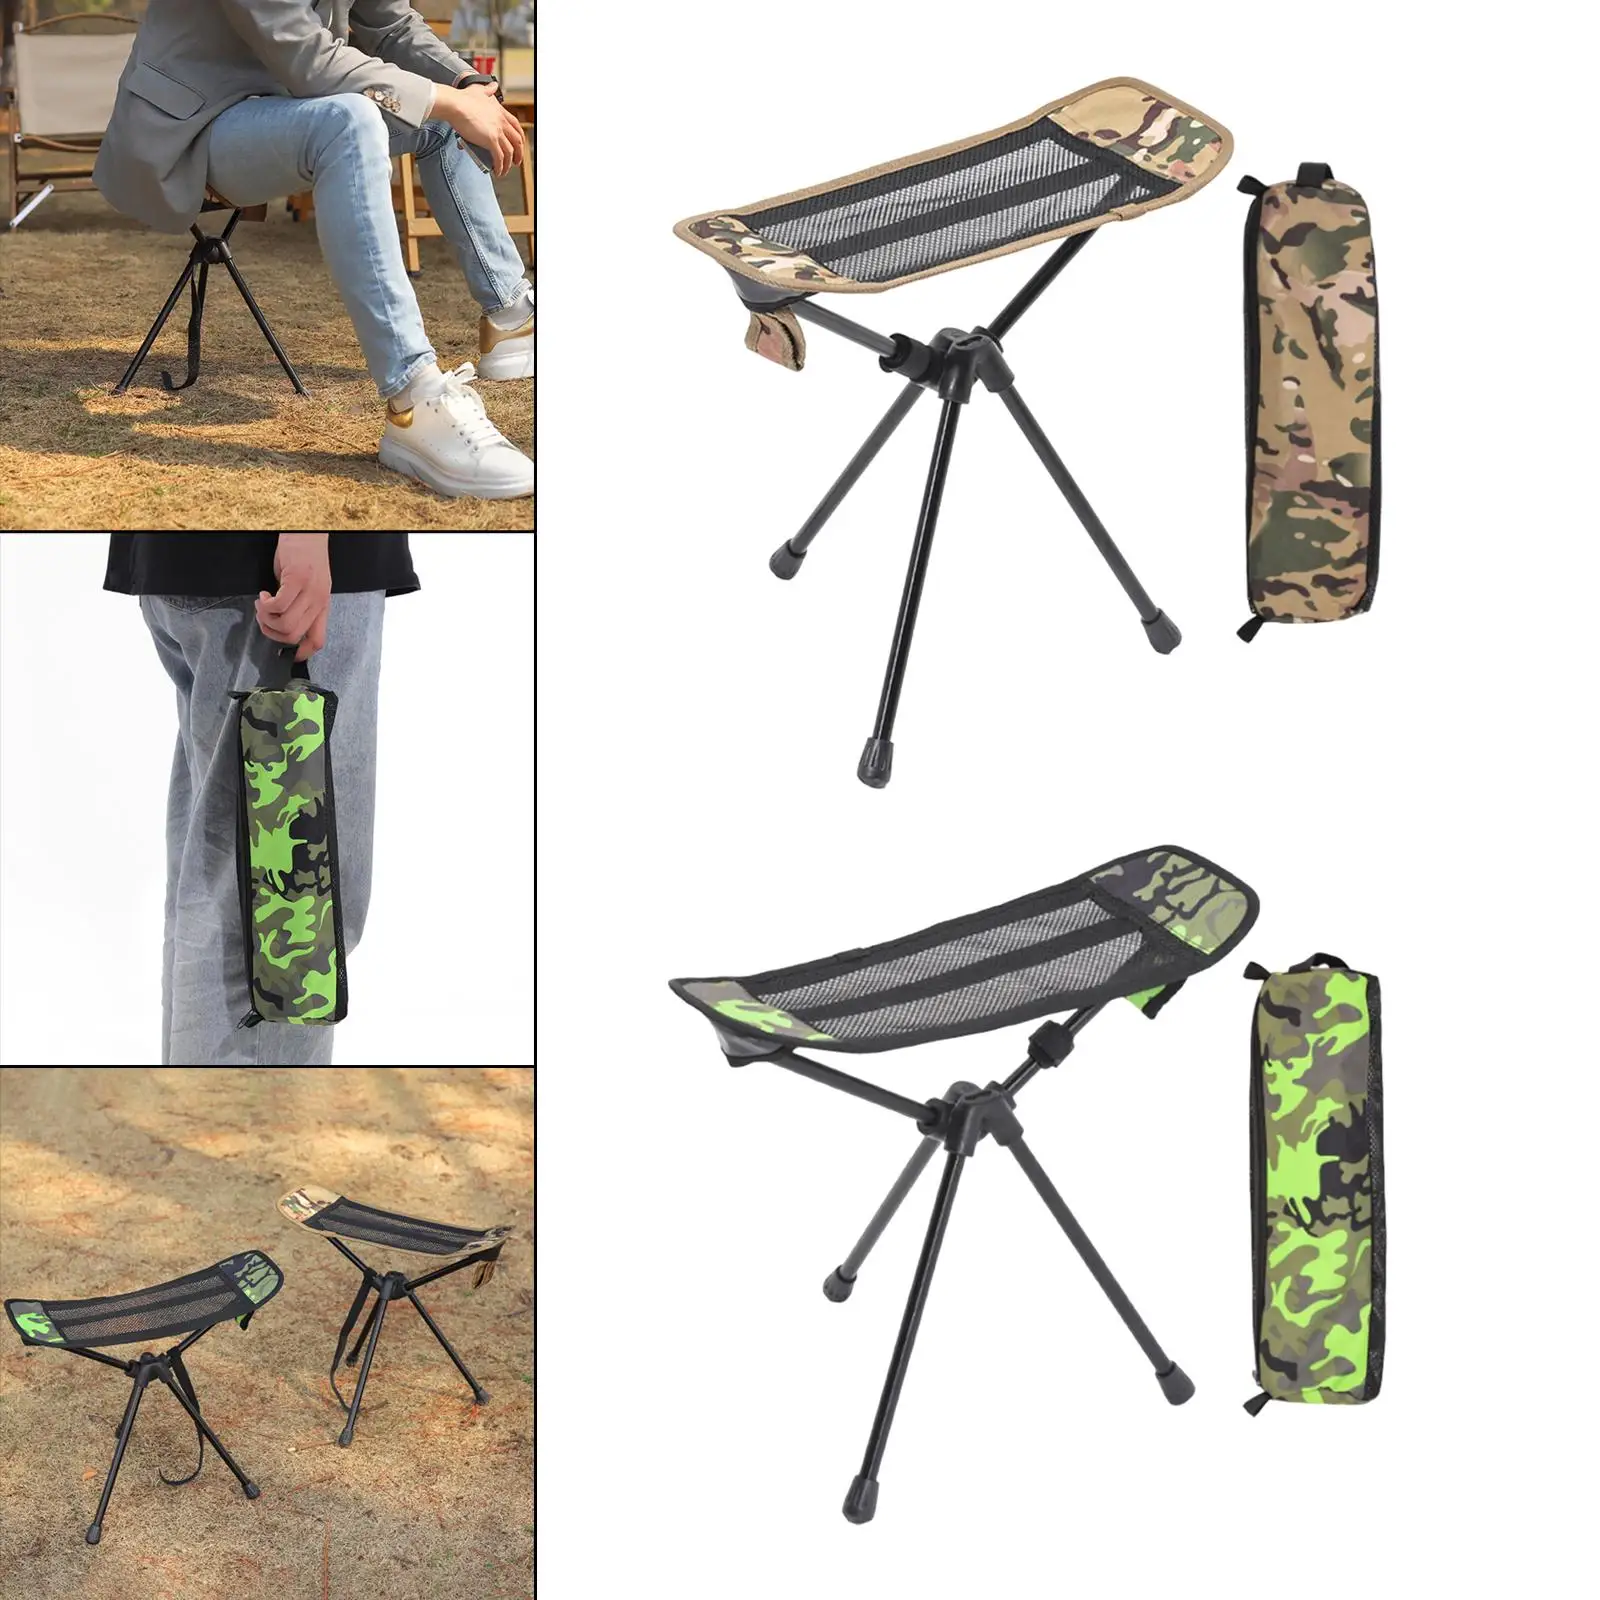 Portable Footstool Lightweight Stools Footrest Stool with Carry Bag Folding Chair recliner for Garden Beach Fishing BBQ Hiking